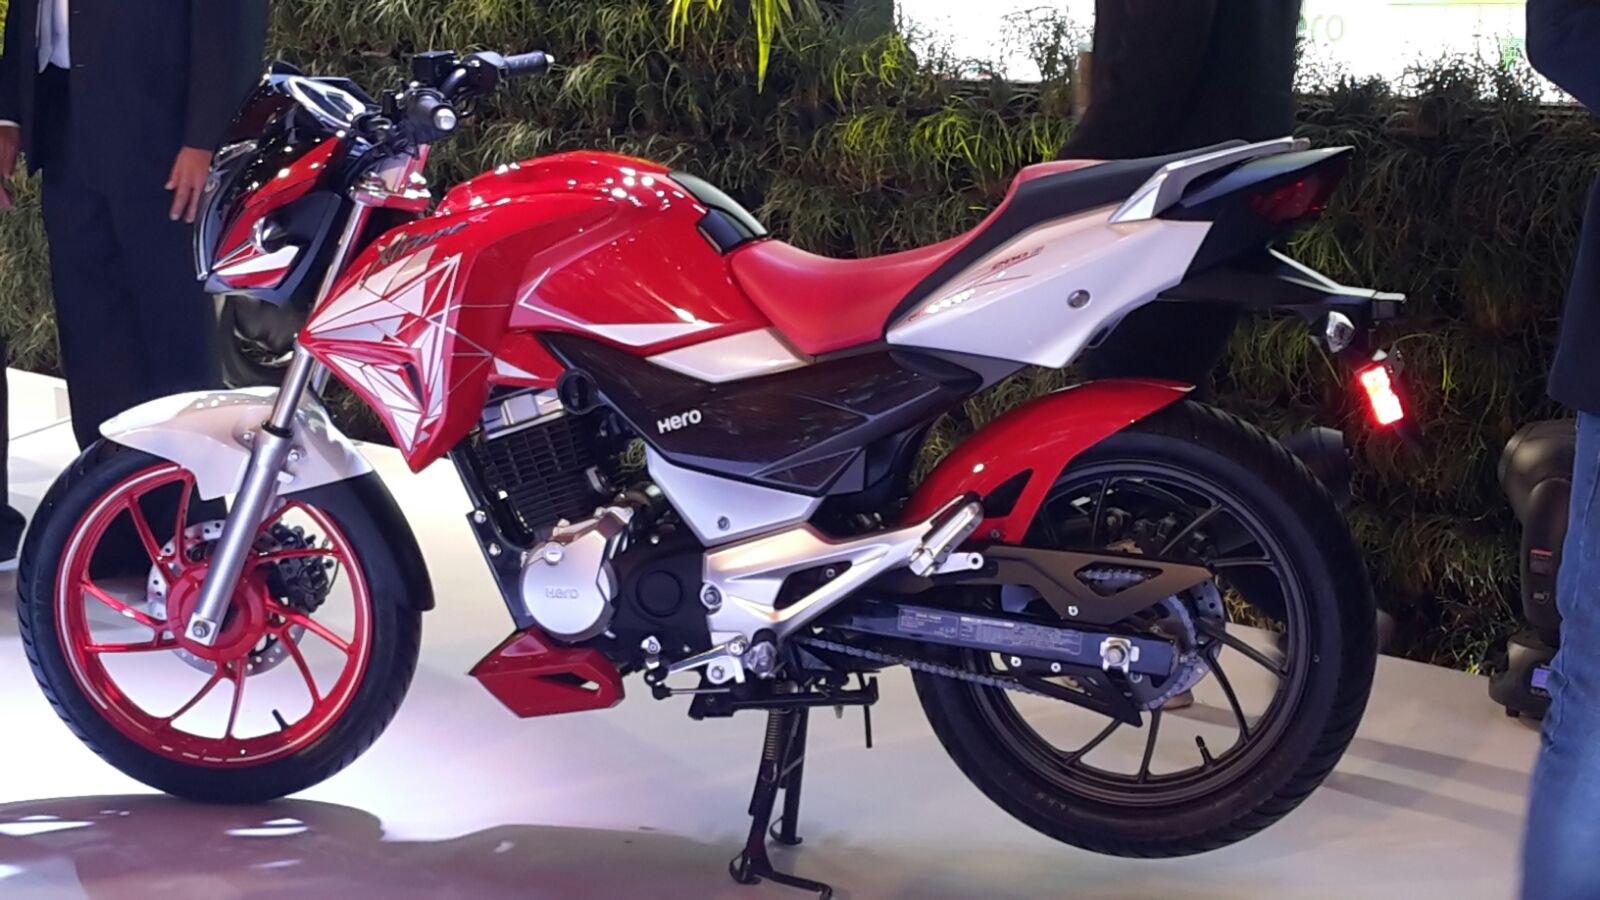 Upcoming New Hero Bikes In India With Price Specifications